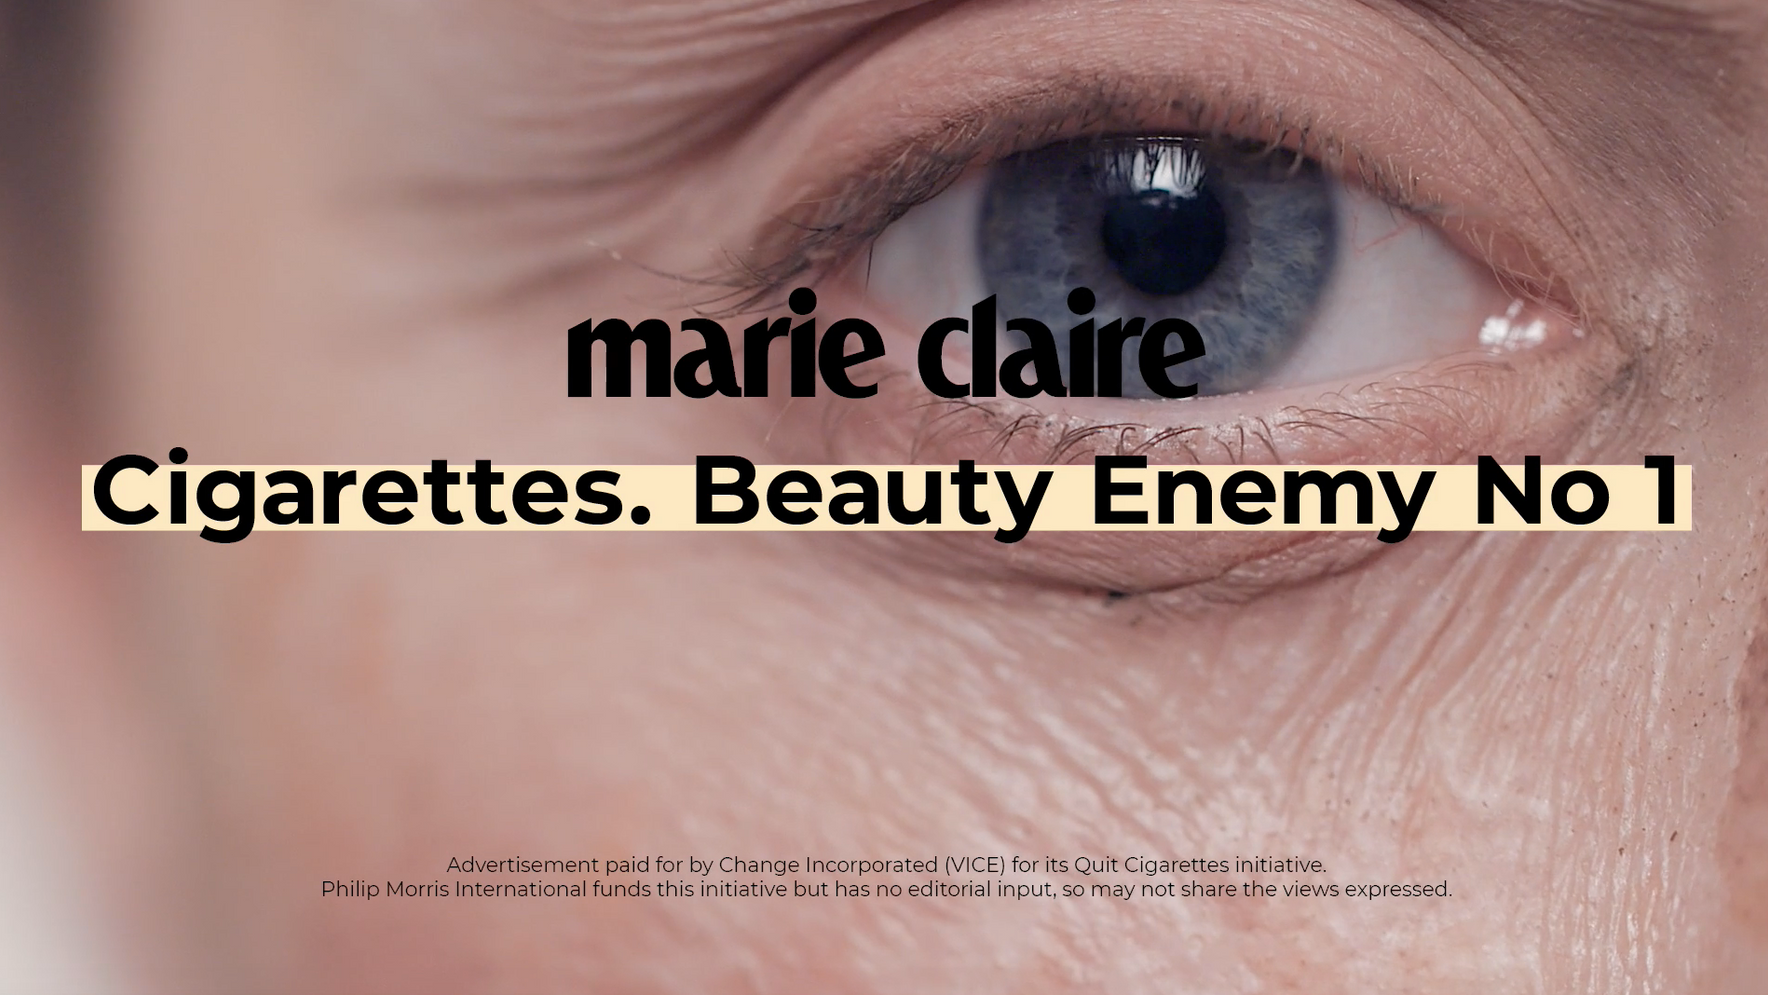 MARIE CLAIRE Beauty Enemy No. 1 